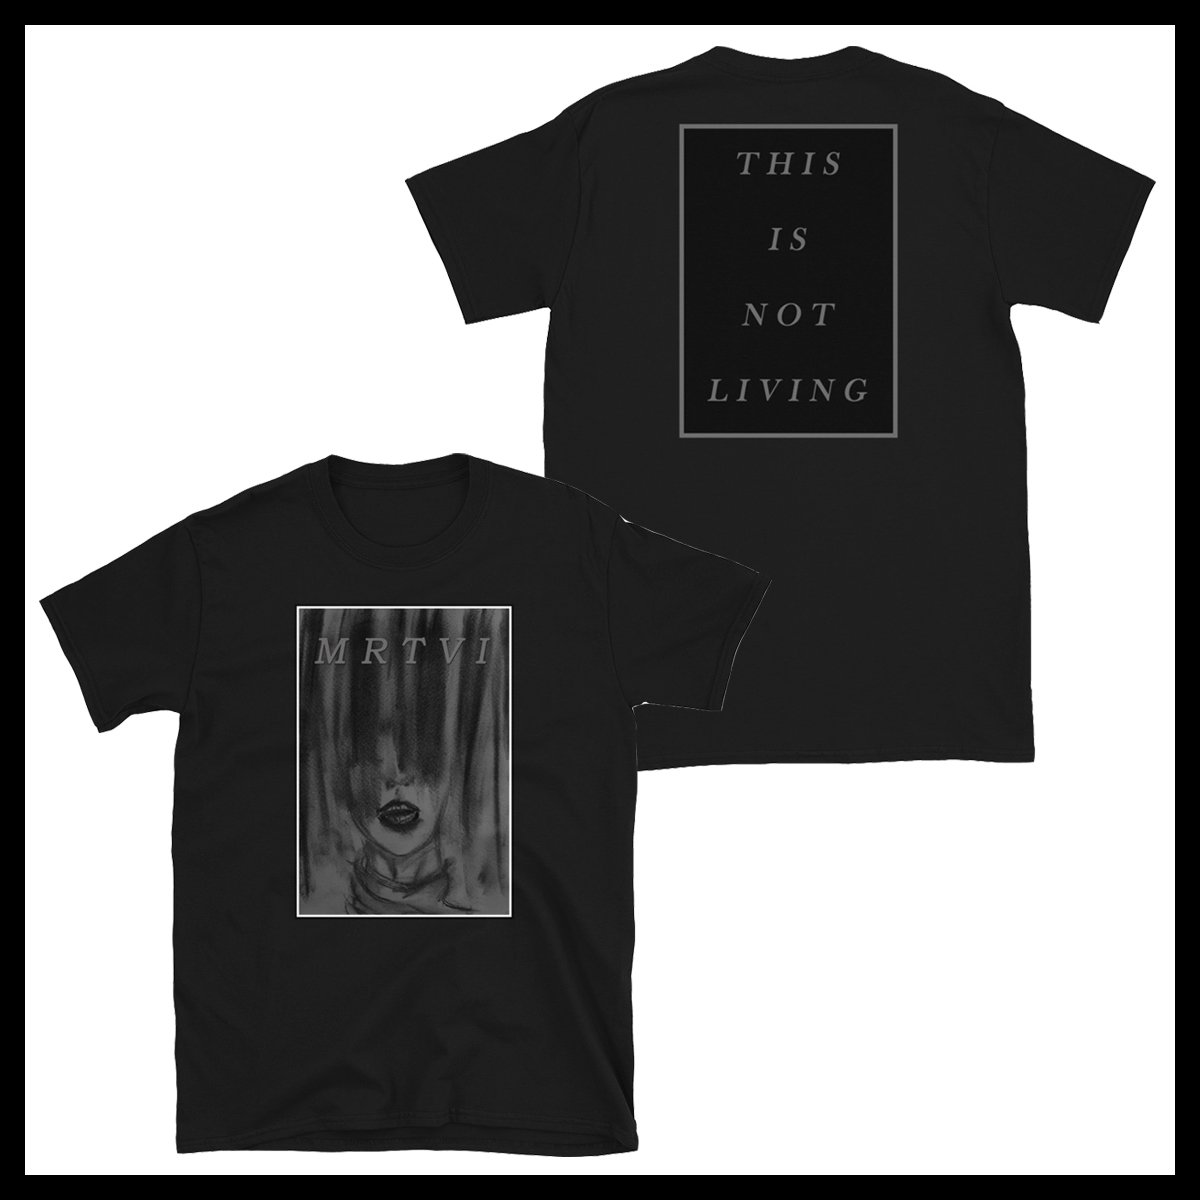 Image of MRTVI x SkvrtAna Limited Edition, This Is Not Living T-Shirt